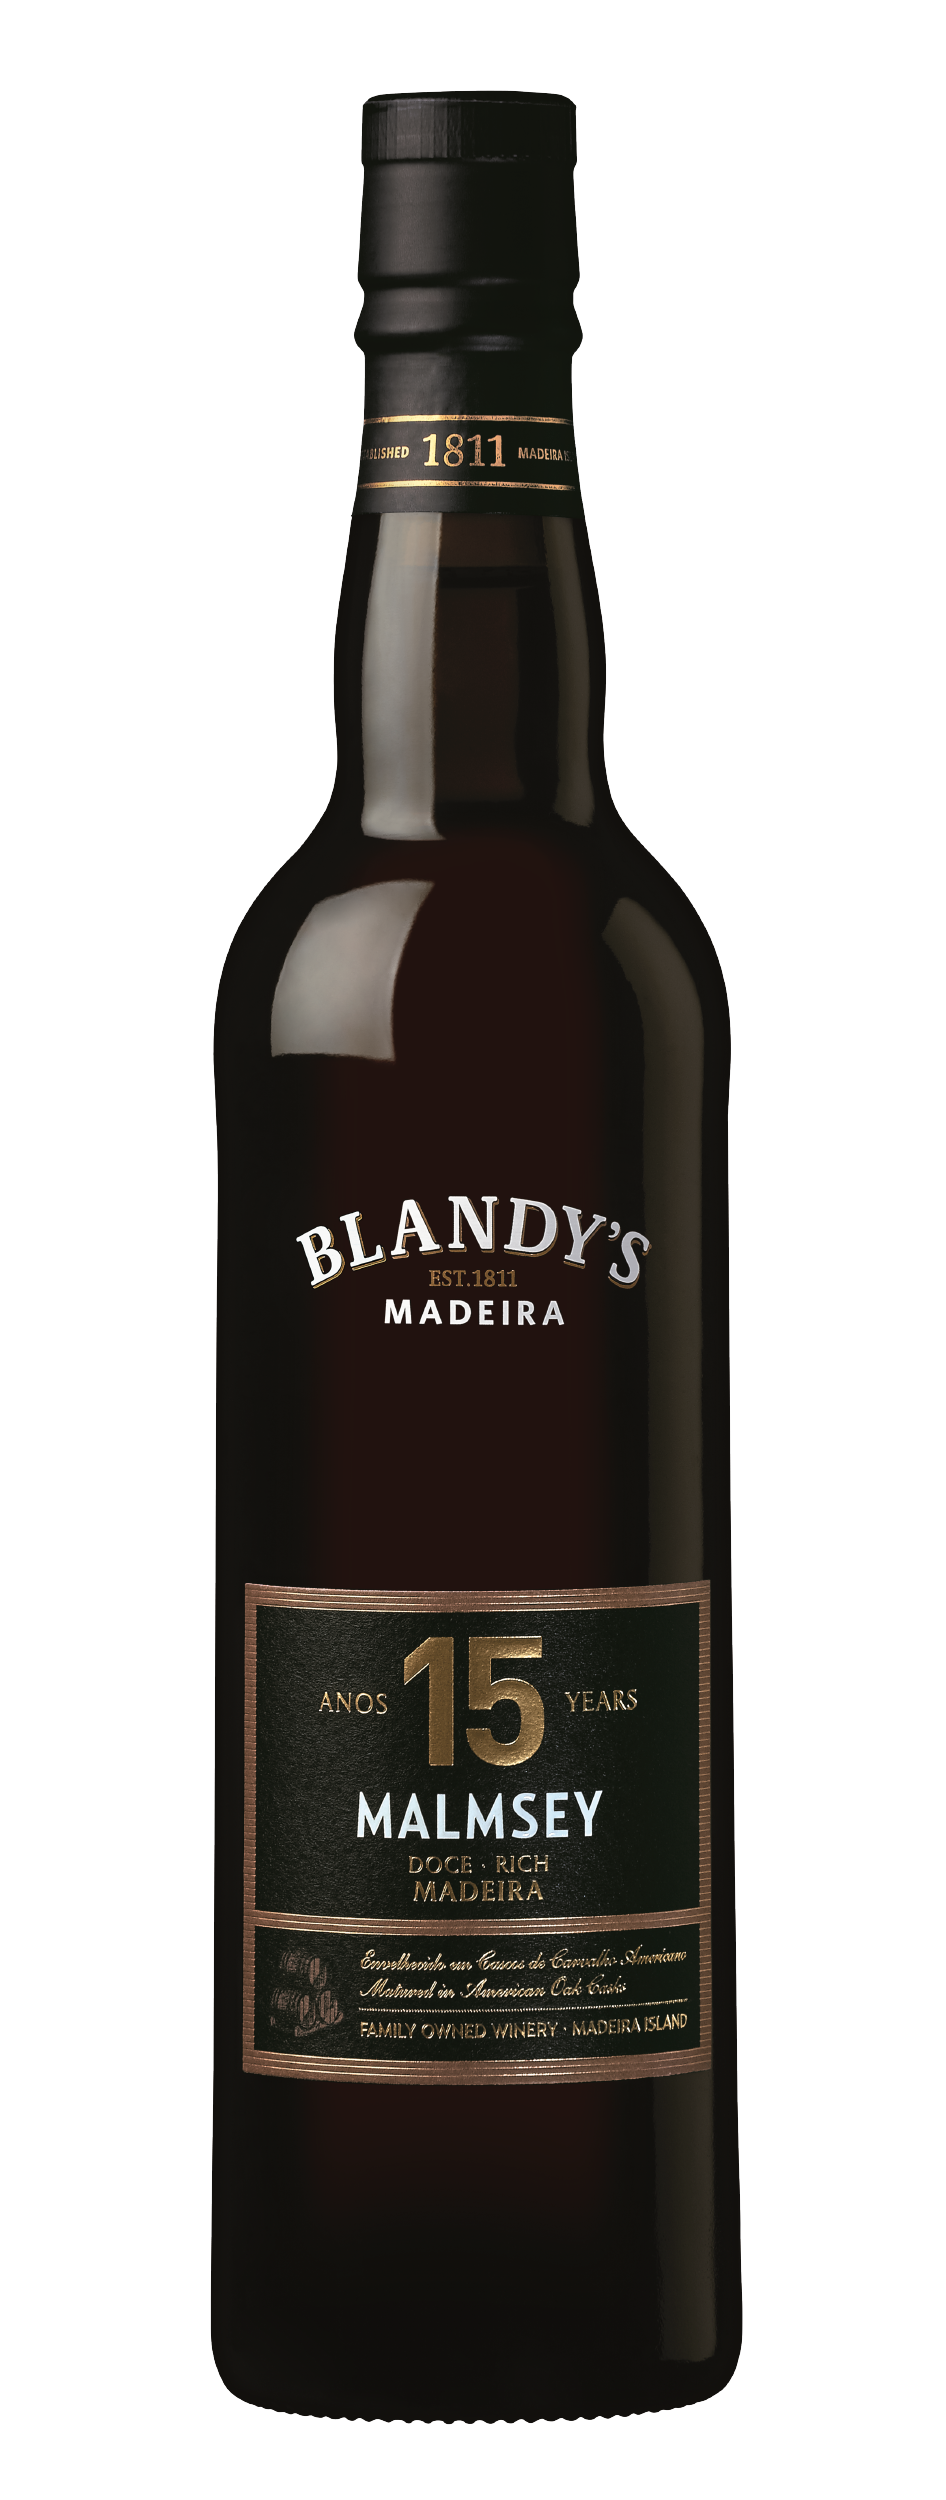 Product Image for BLANDY'S MALMSEY 15 YEAR OLD